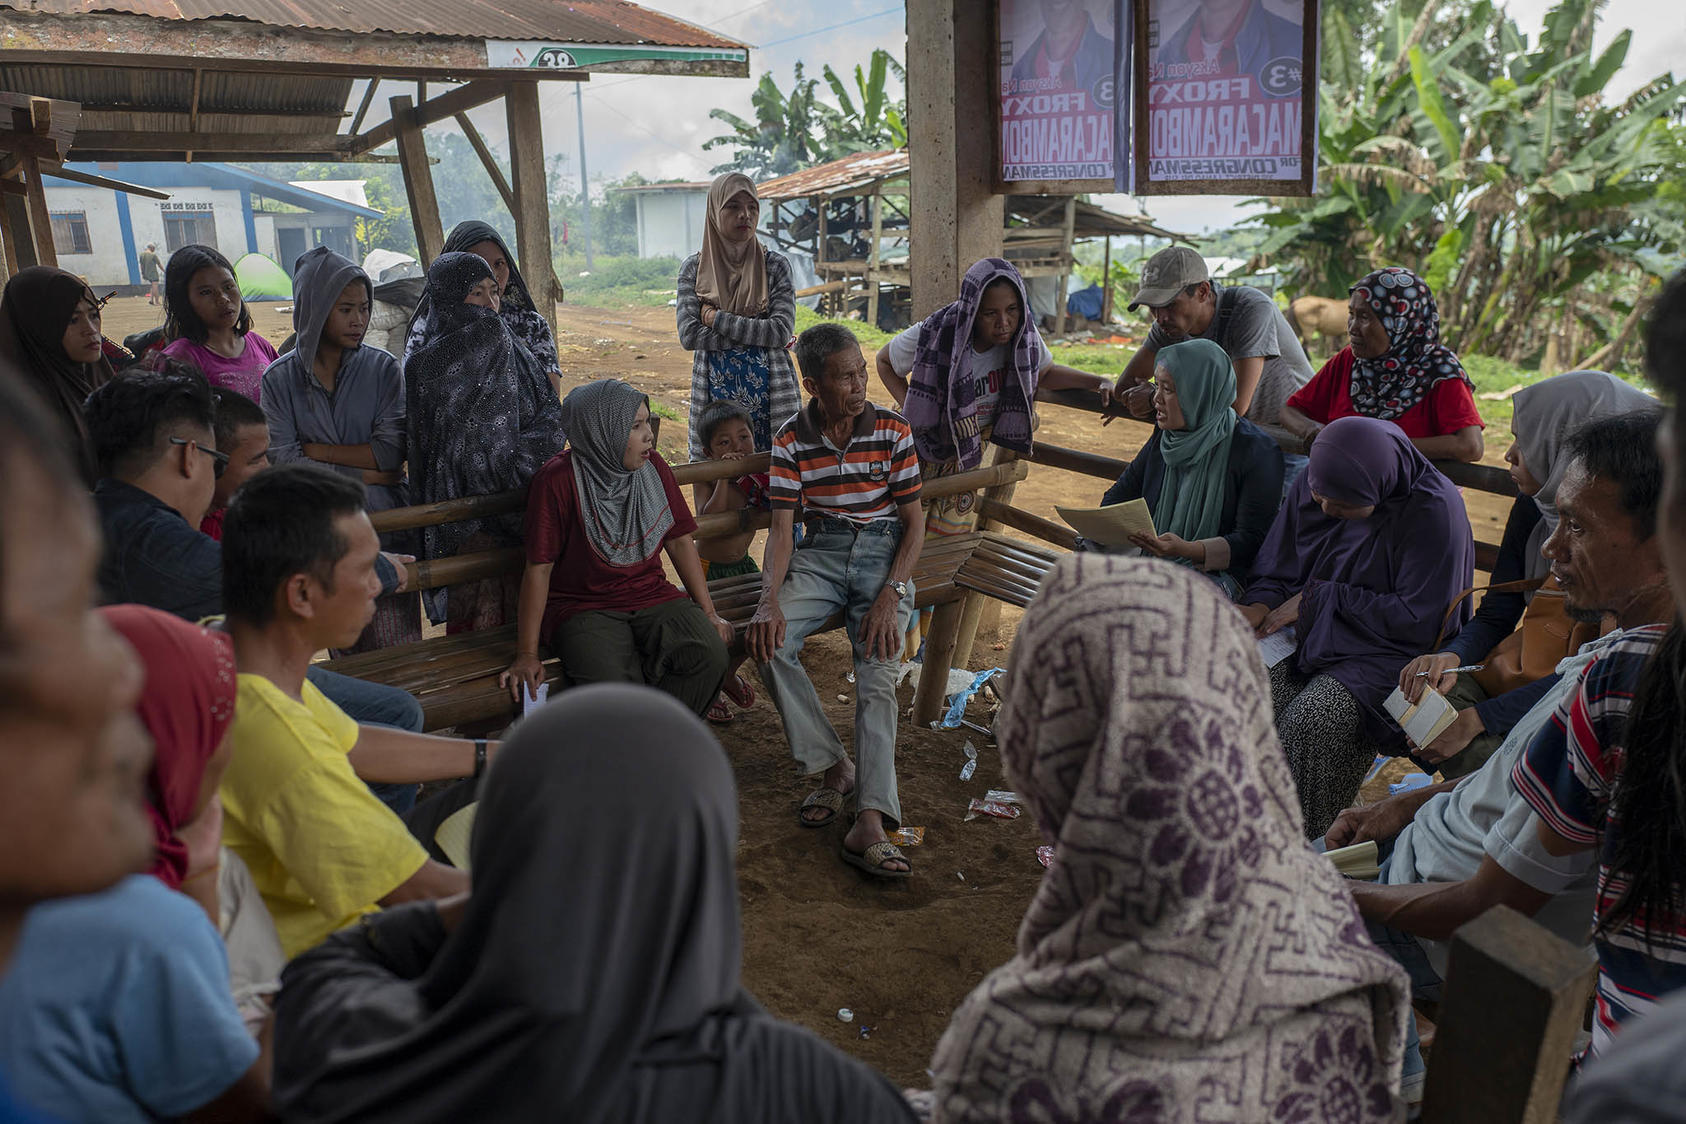 Macaraya Ampuan, an influential leader who once commanded the Moro Islamic Liberation Front unit, in a meeting with villagers, contractors, and NGO workers on a new water pump in Padas, the Philippines, April 13, 2019. (Jes Aznar/The New York Times)